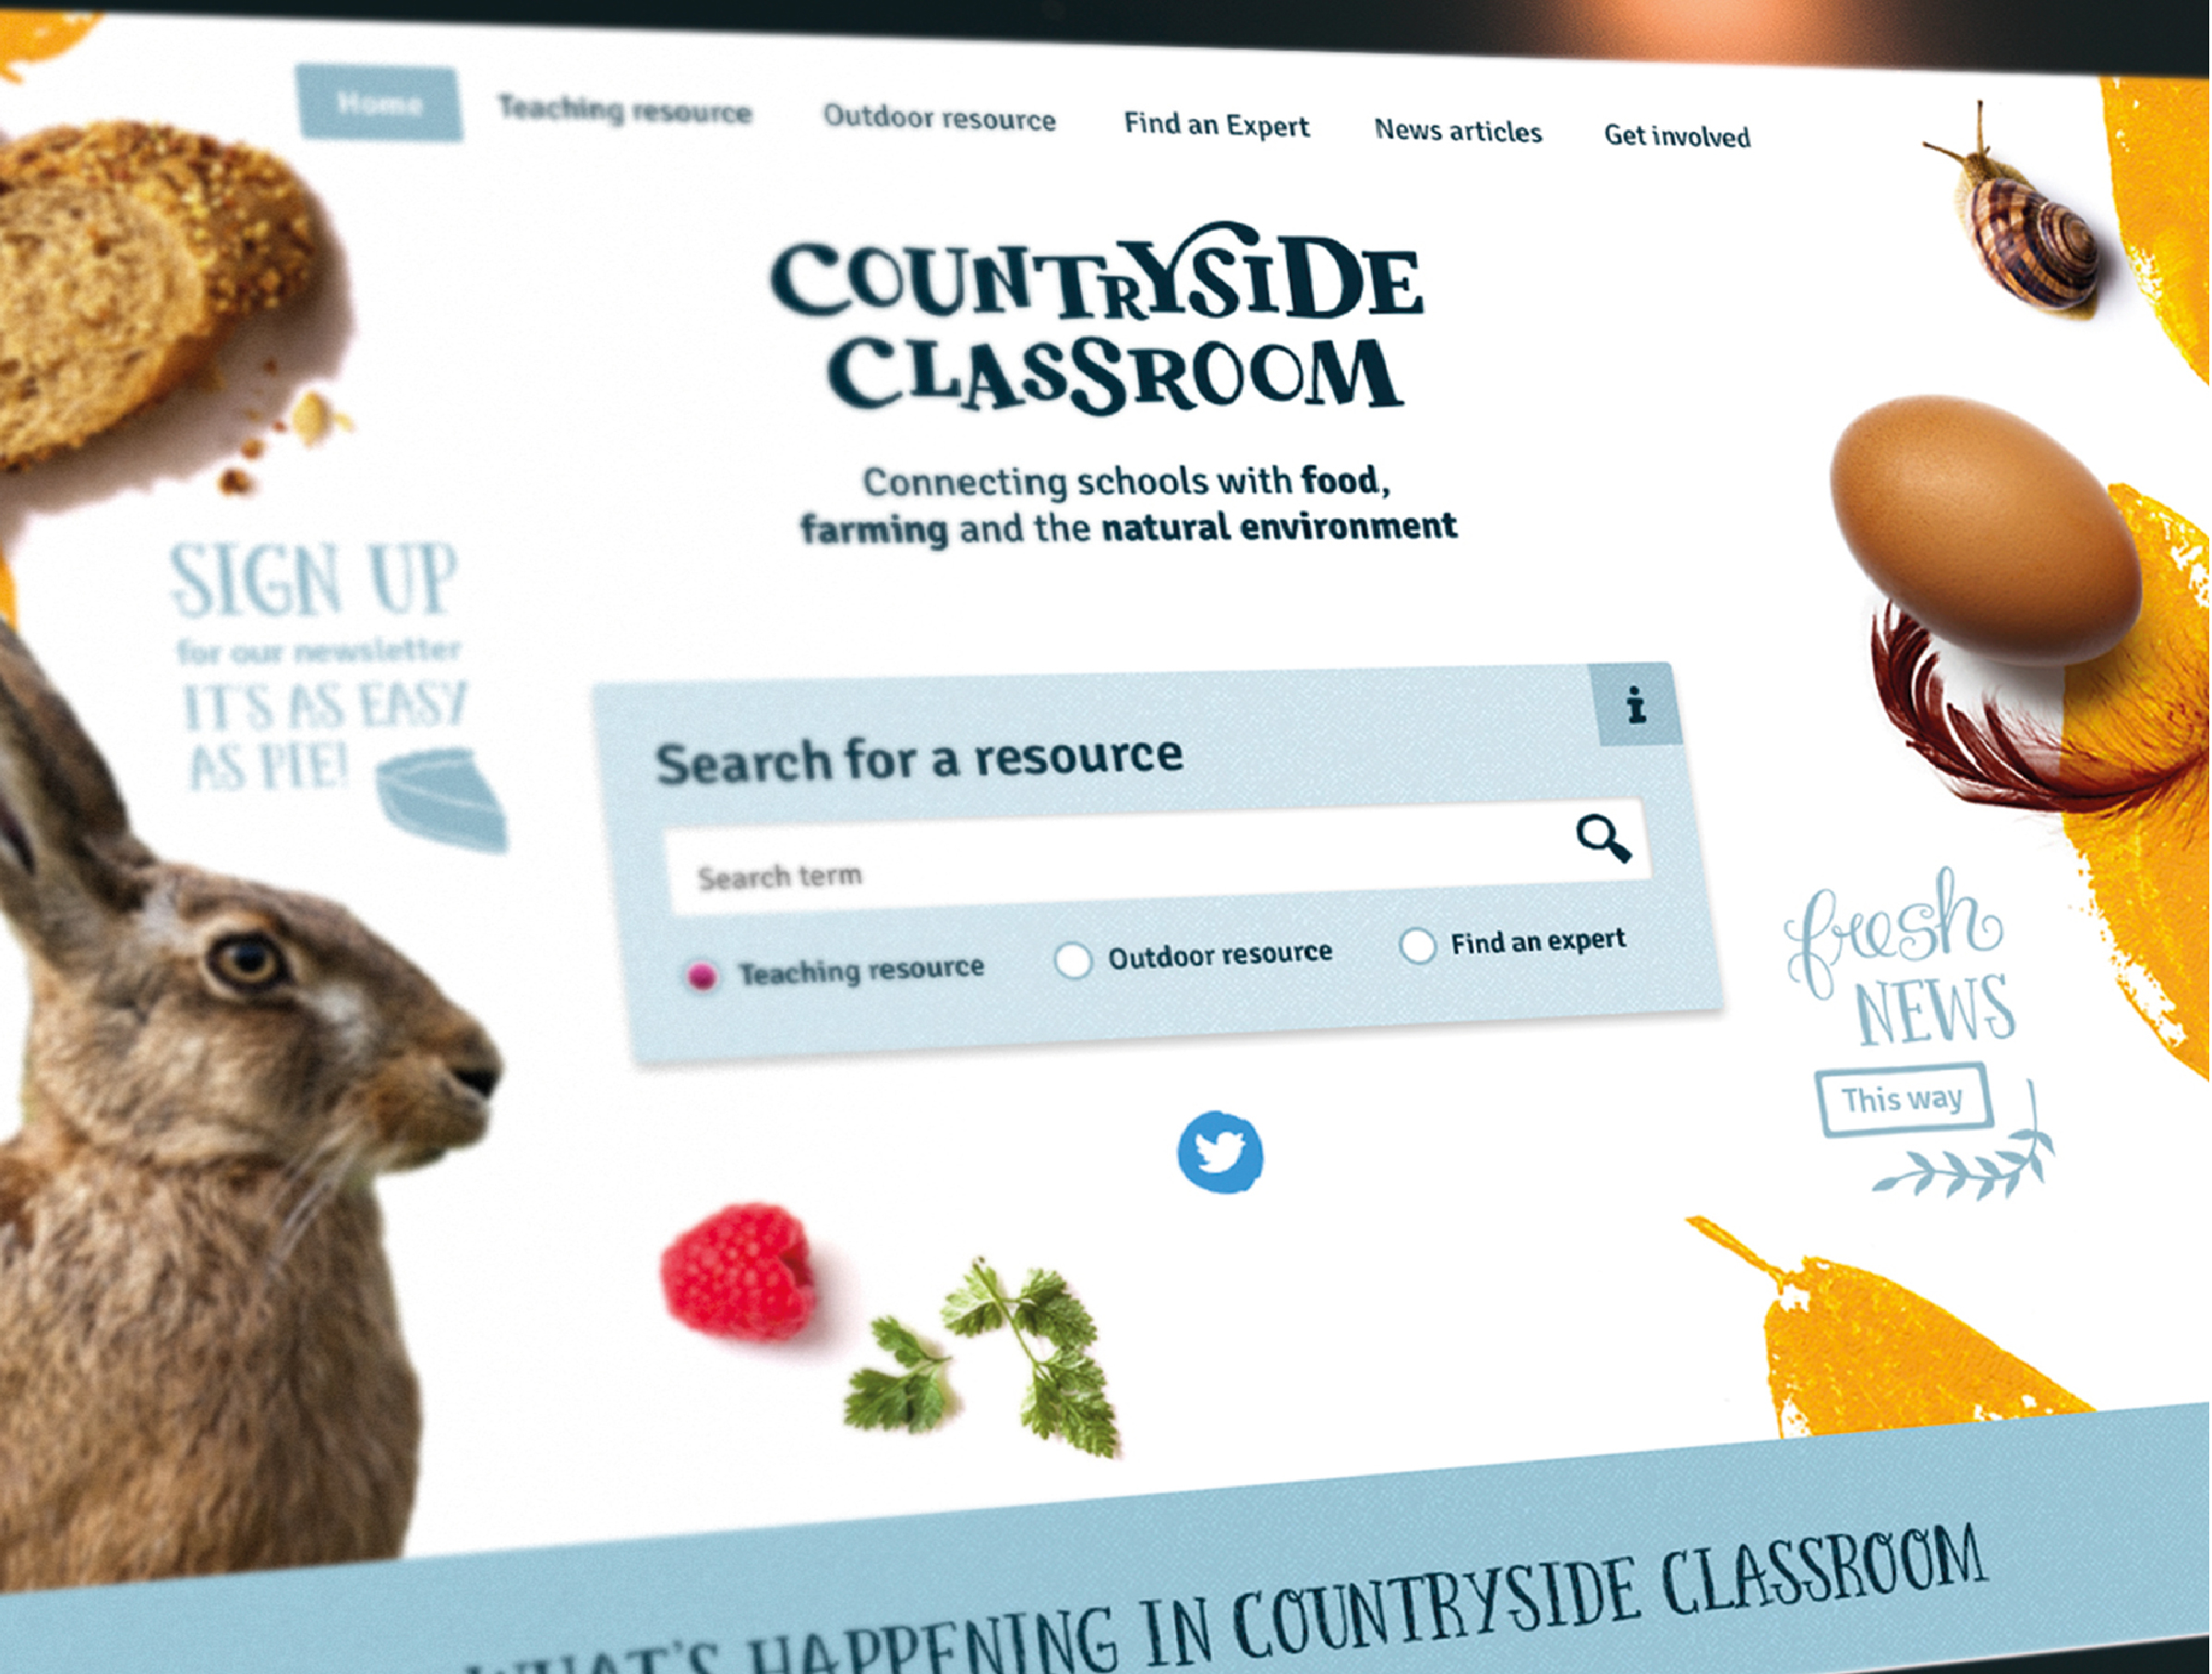 Countryside classroom website on a laptop